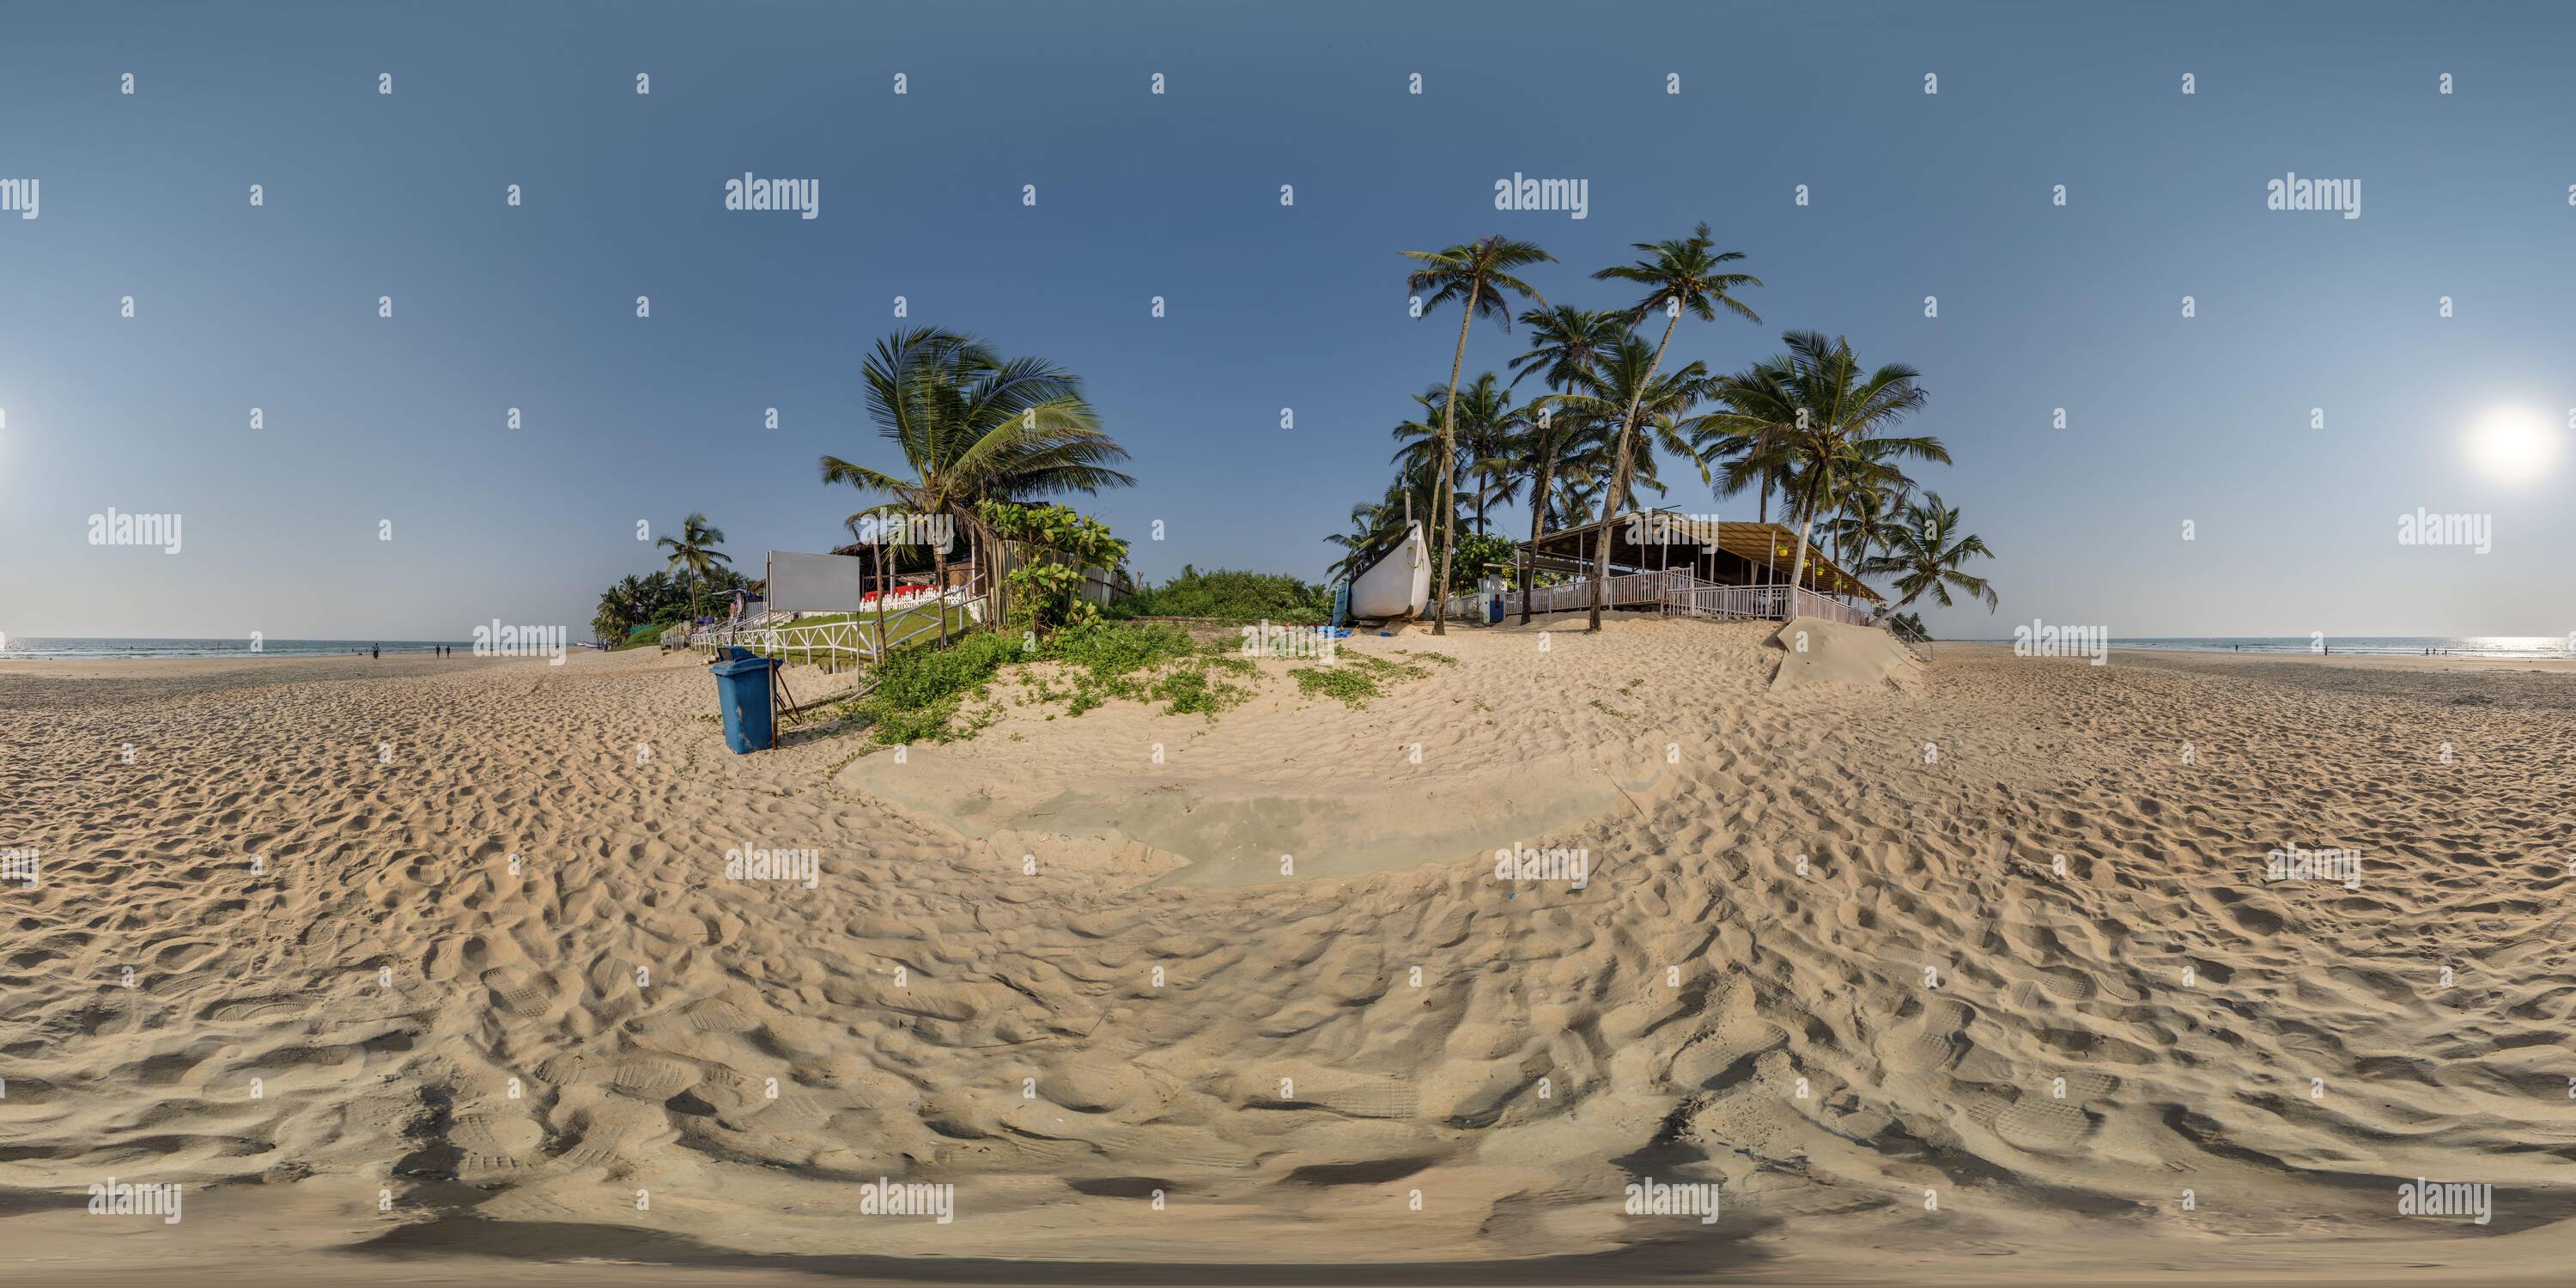 360 degree panoramic view of 360 hdri panorama with coconut trees on ocean coast near tropical shack or open air cafe on beach in equirectangular spherical seamless projection,